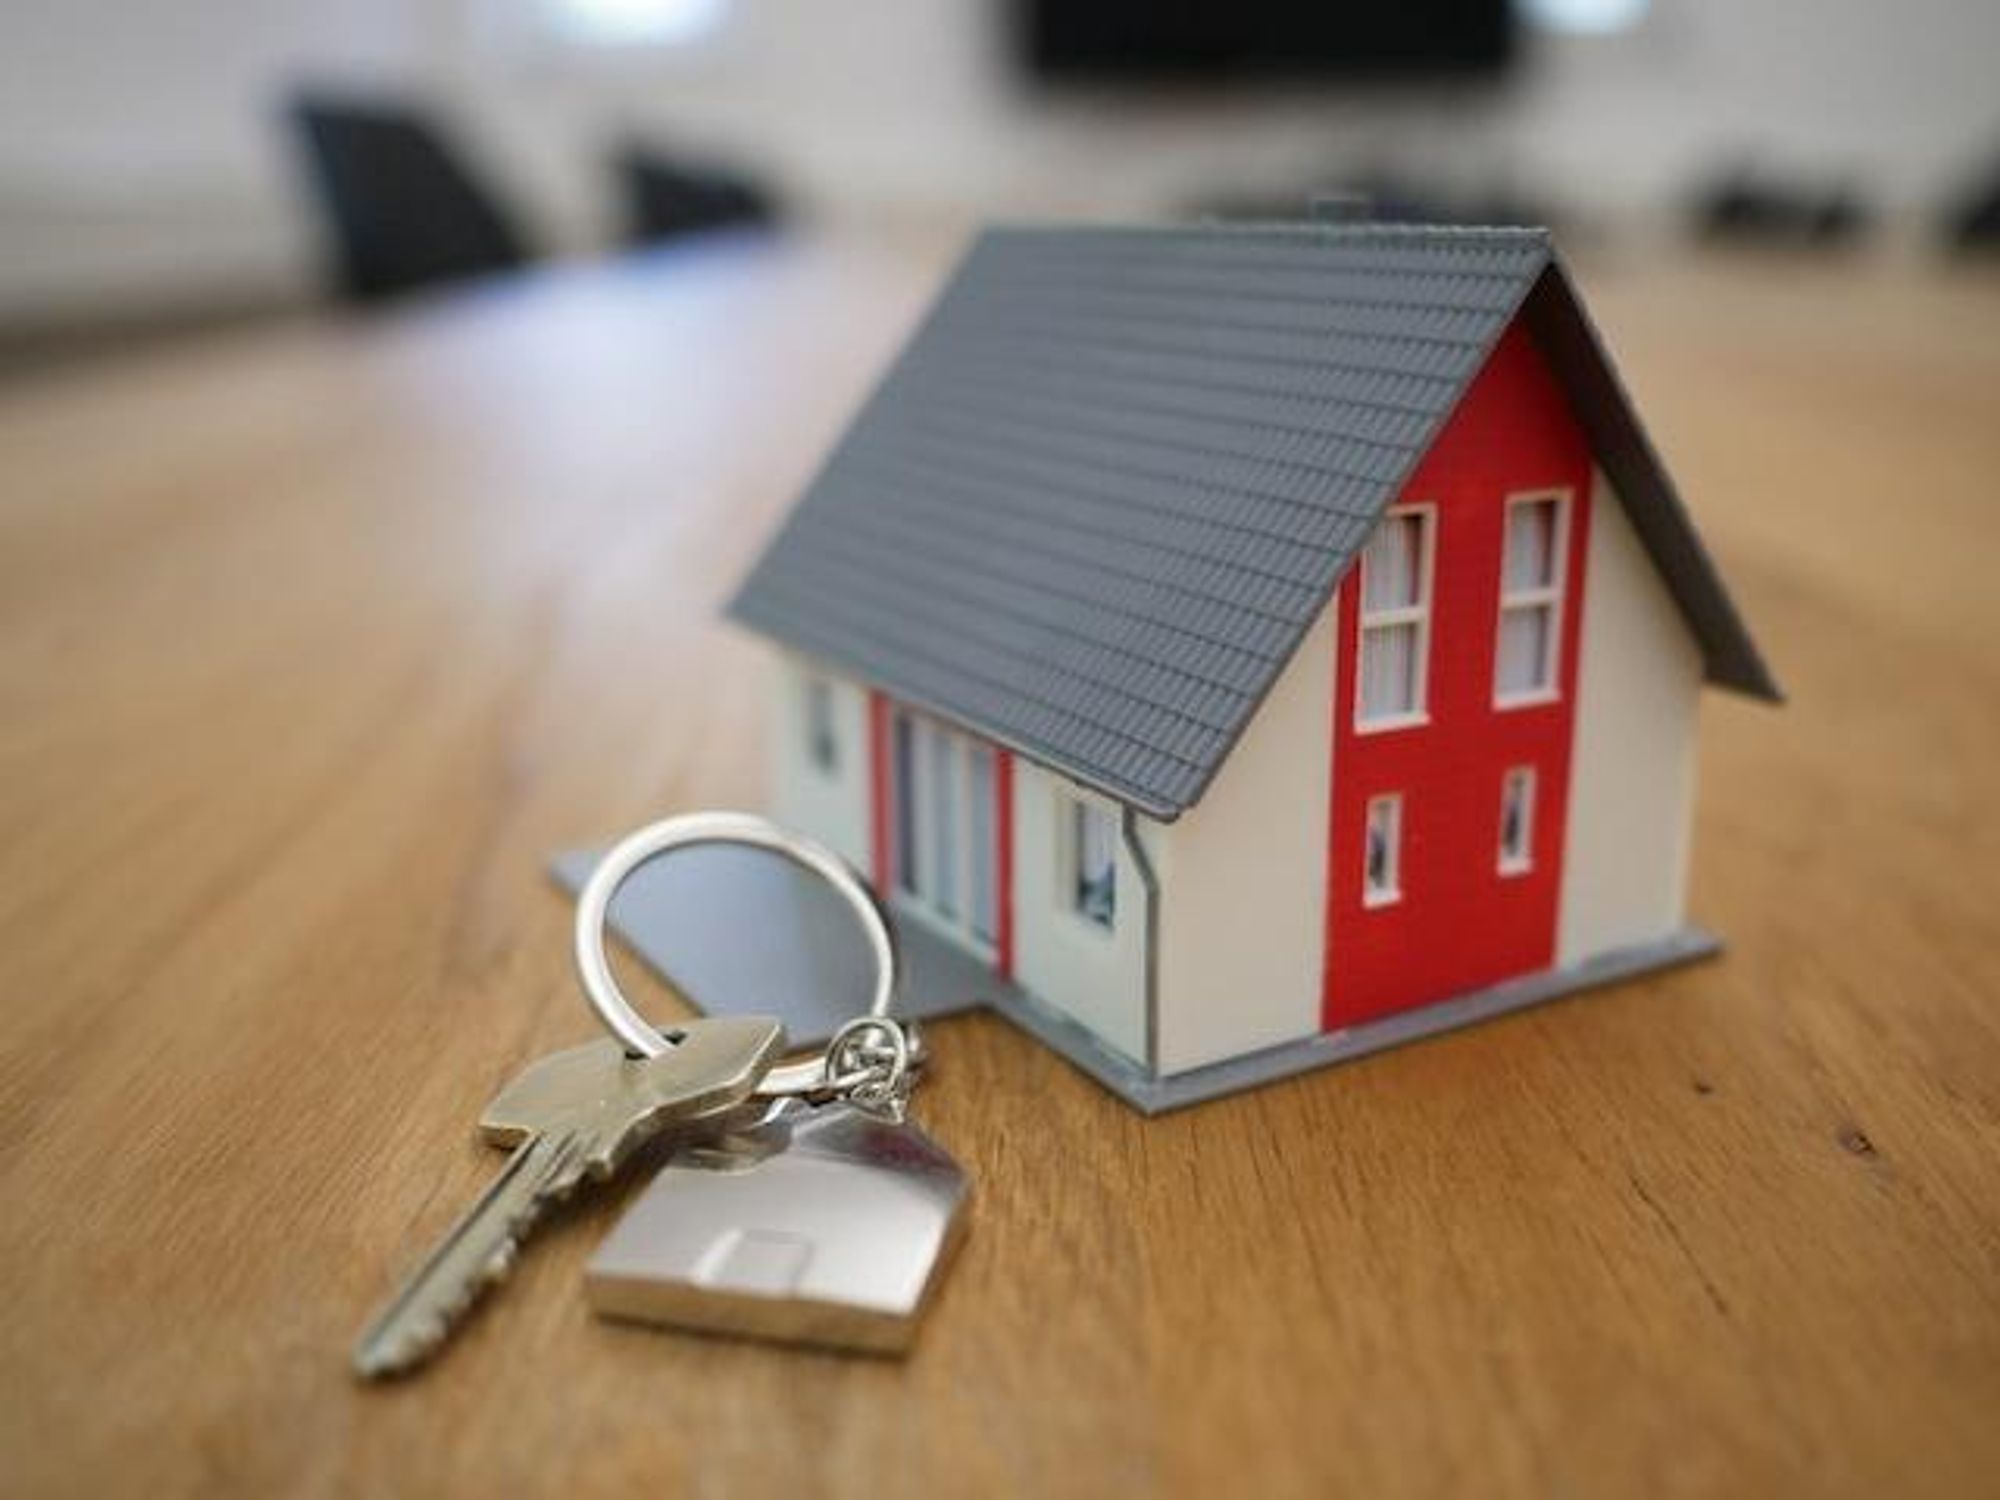 Small scale model of a house on a table with a set of keys